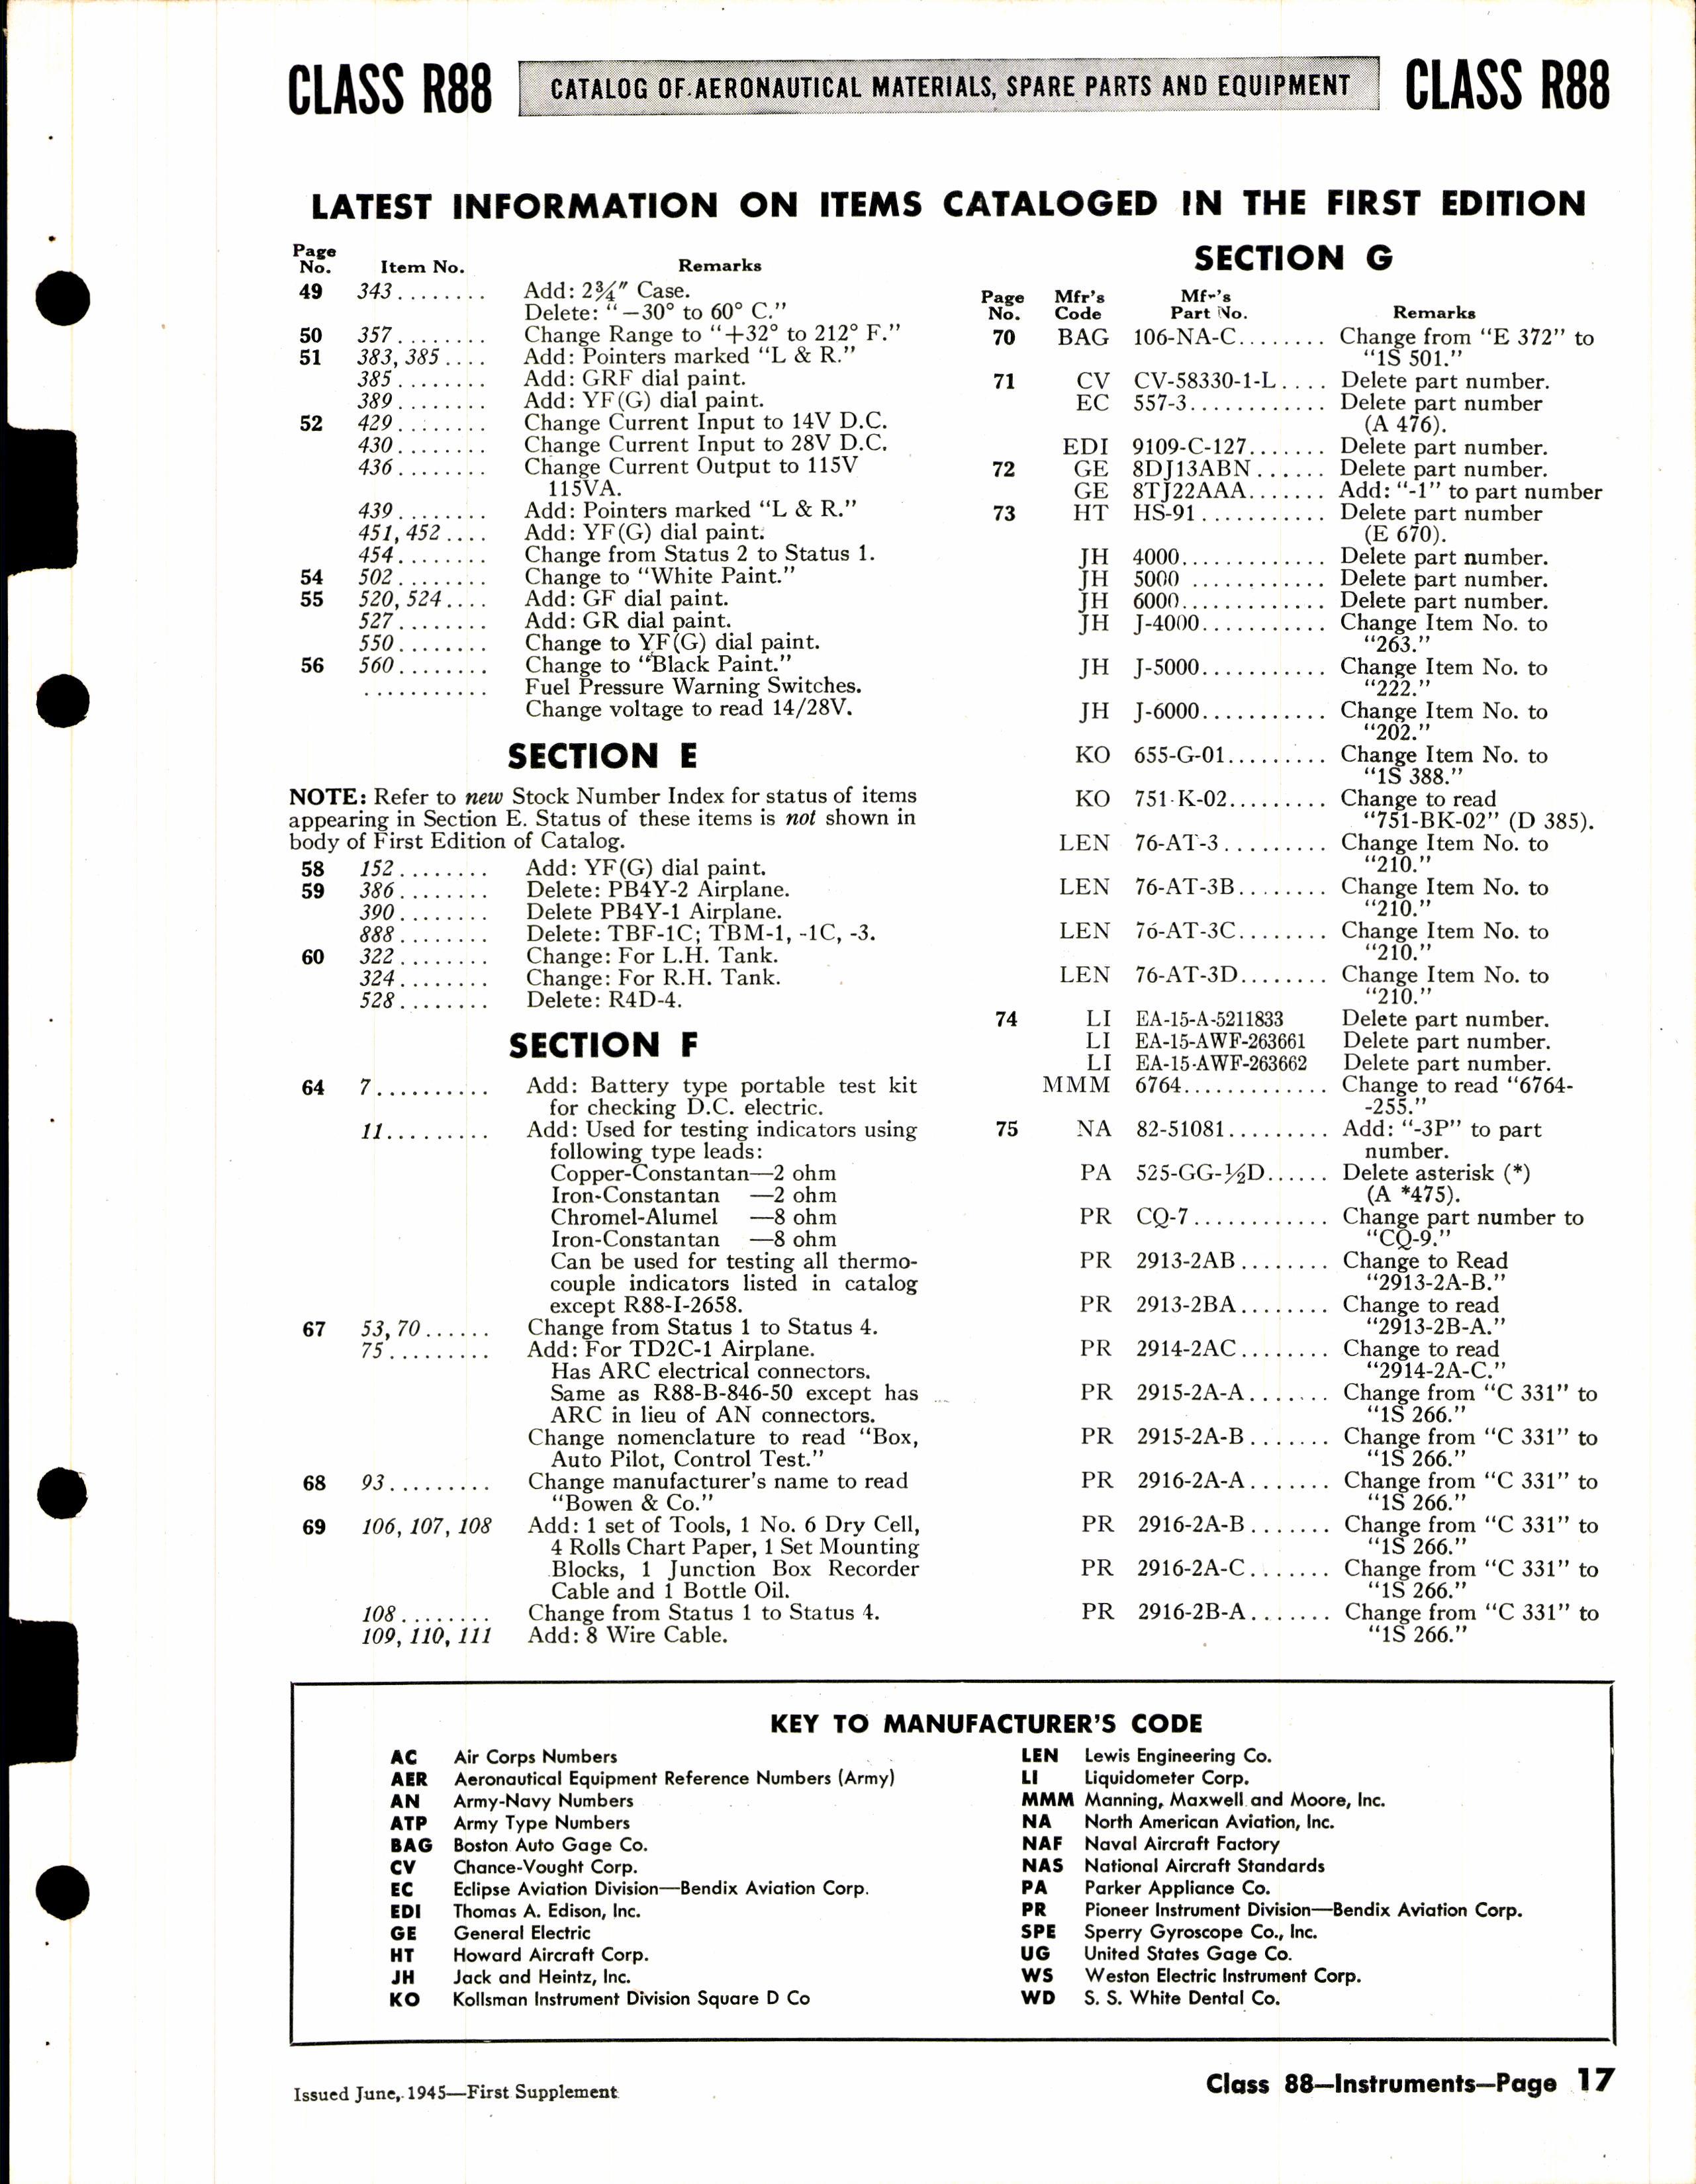 Sample page 17 from AirCorps Library document: Aeronautical Instruments